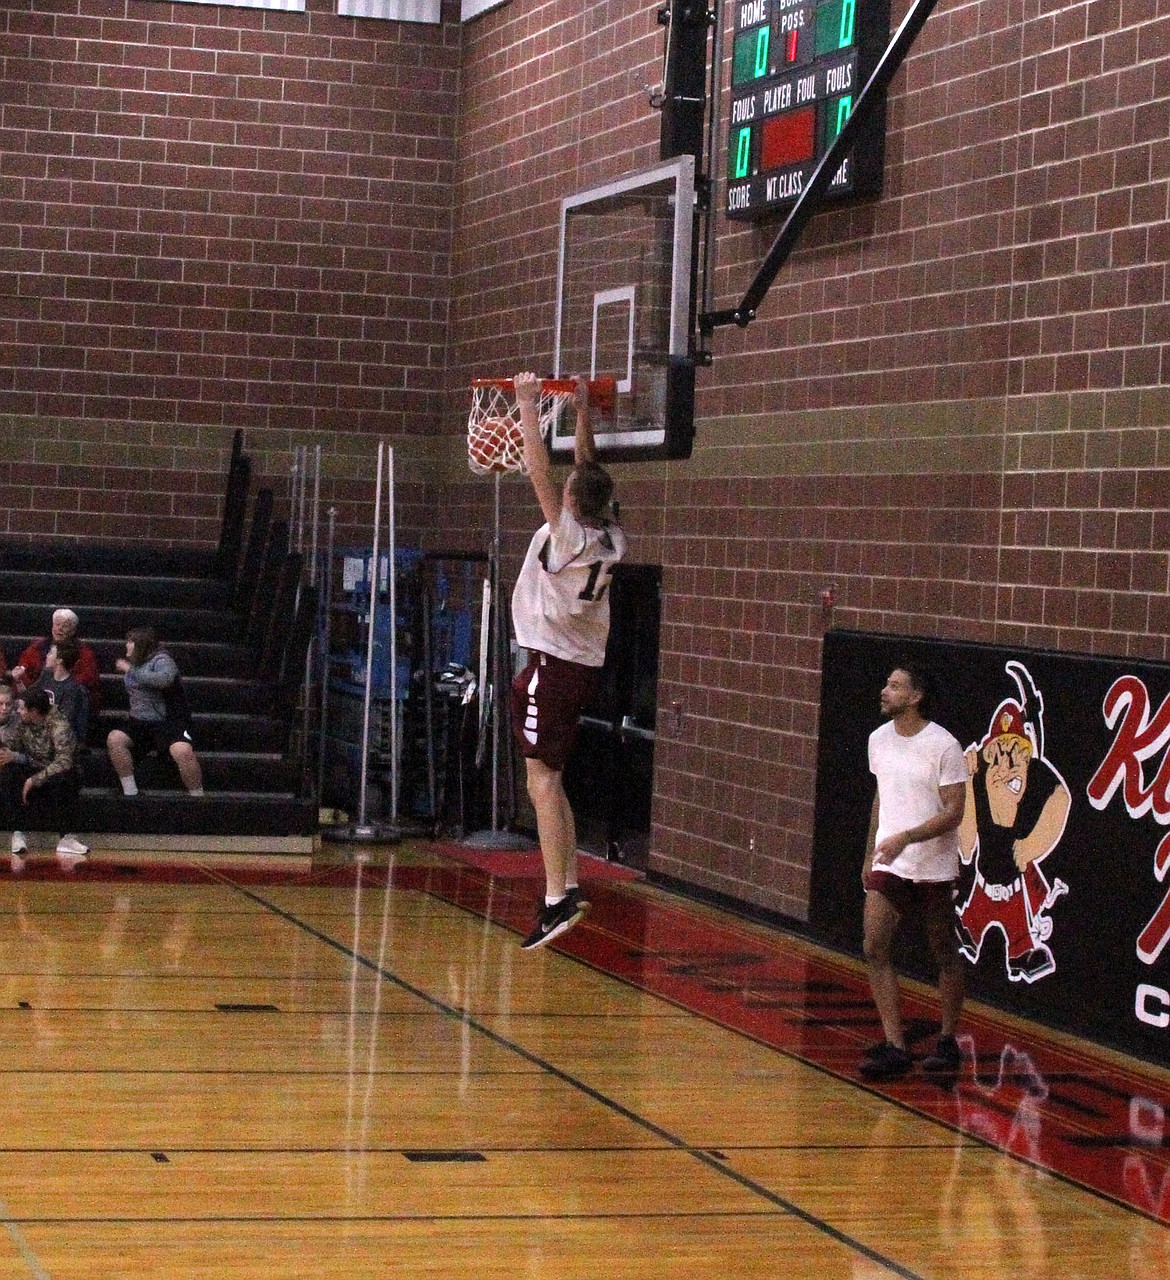 James Carlson dazzles the crowd with a dunk during the NIC mens scrimmage.